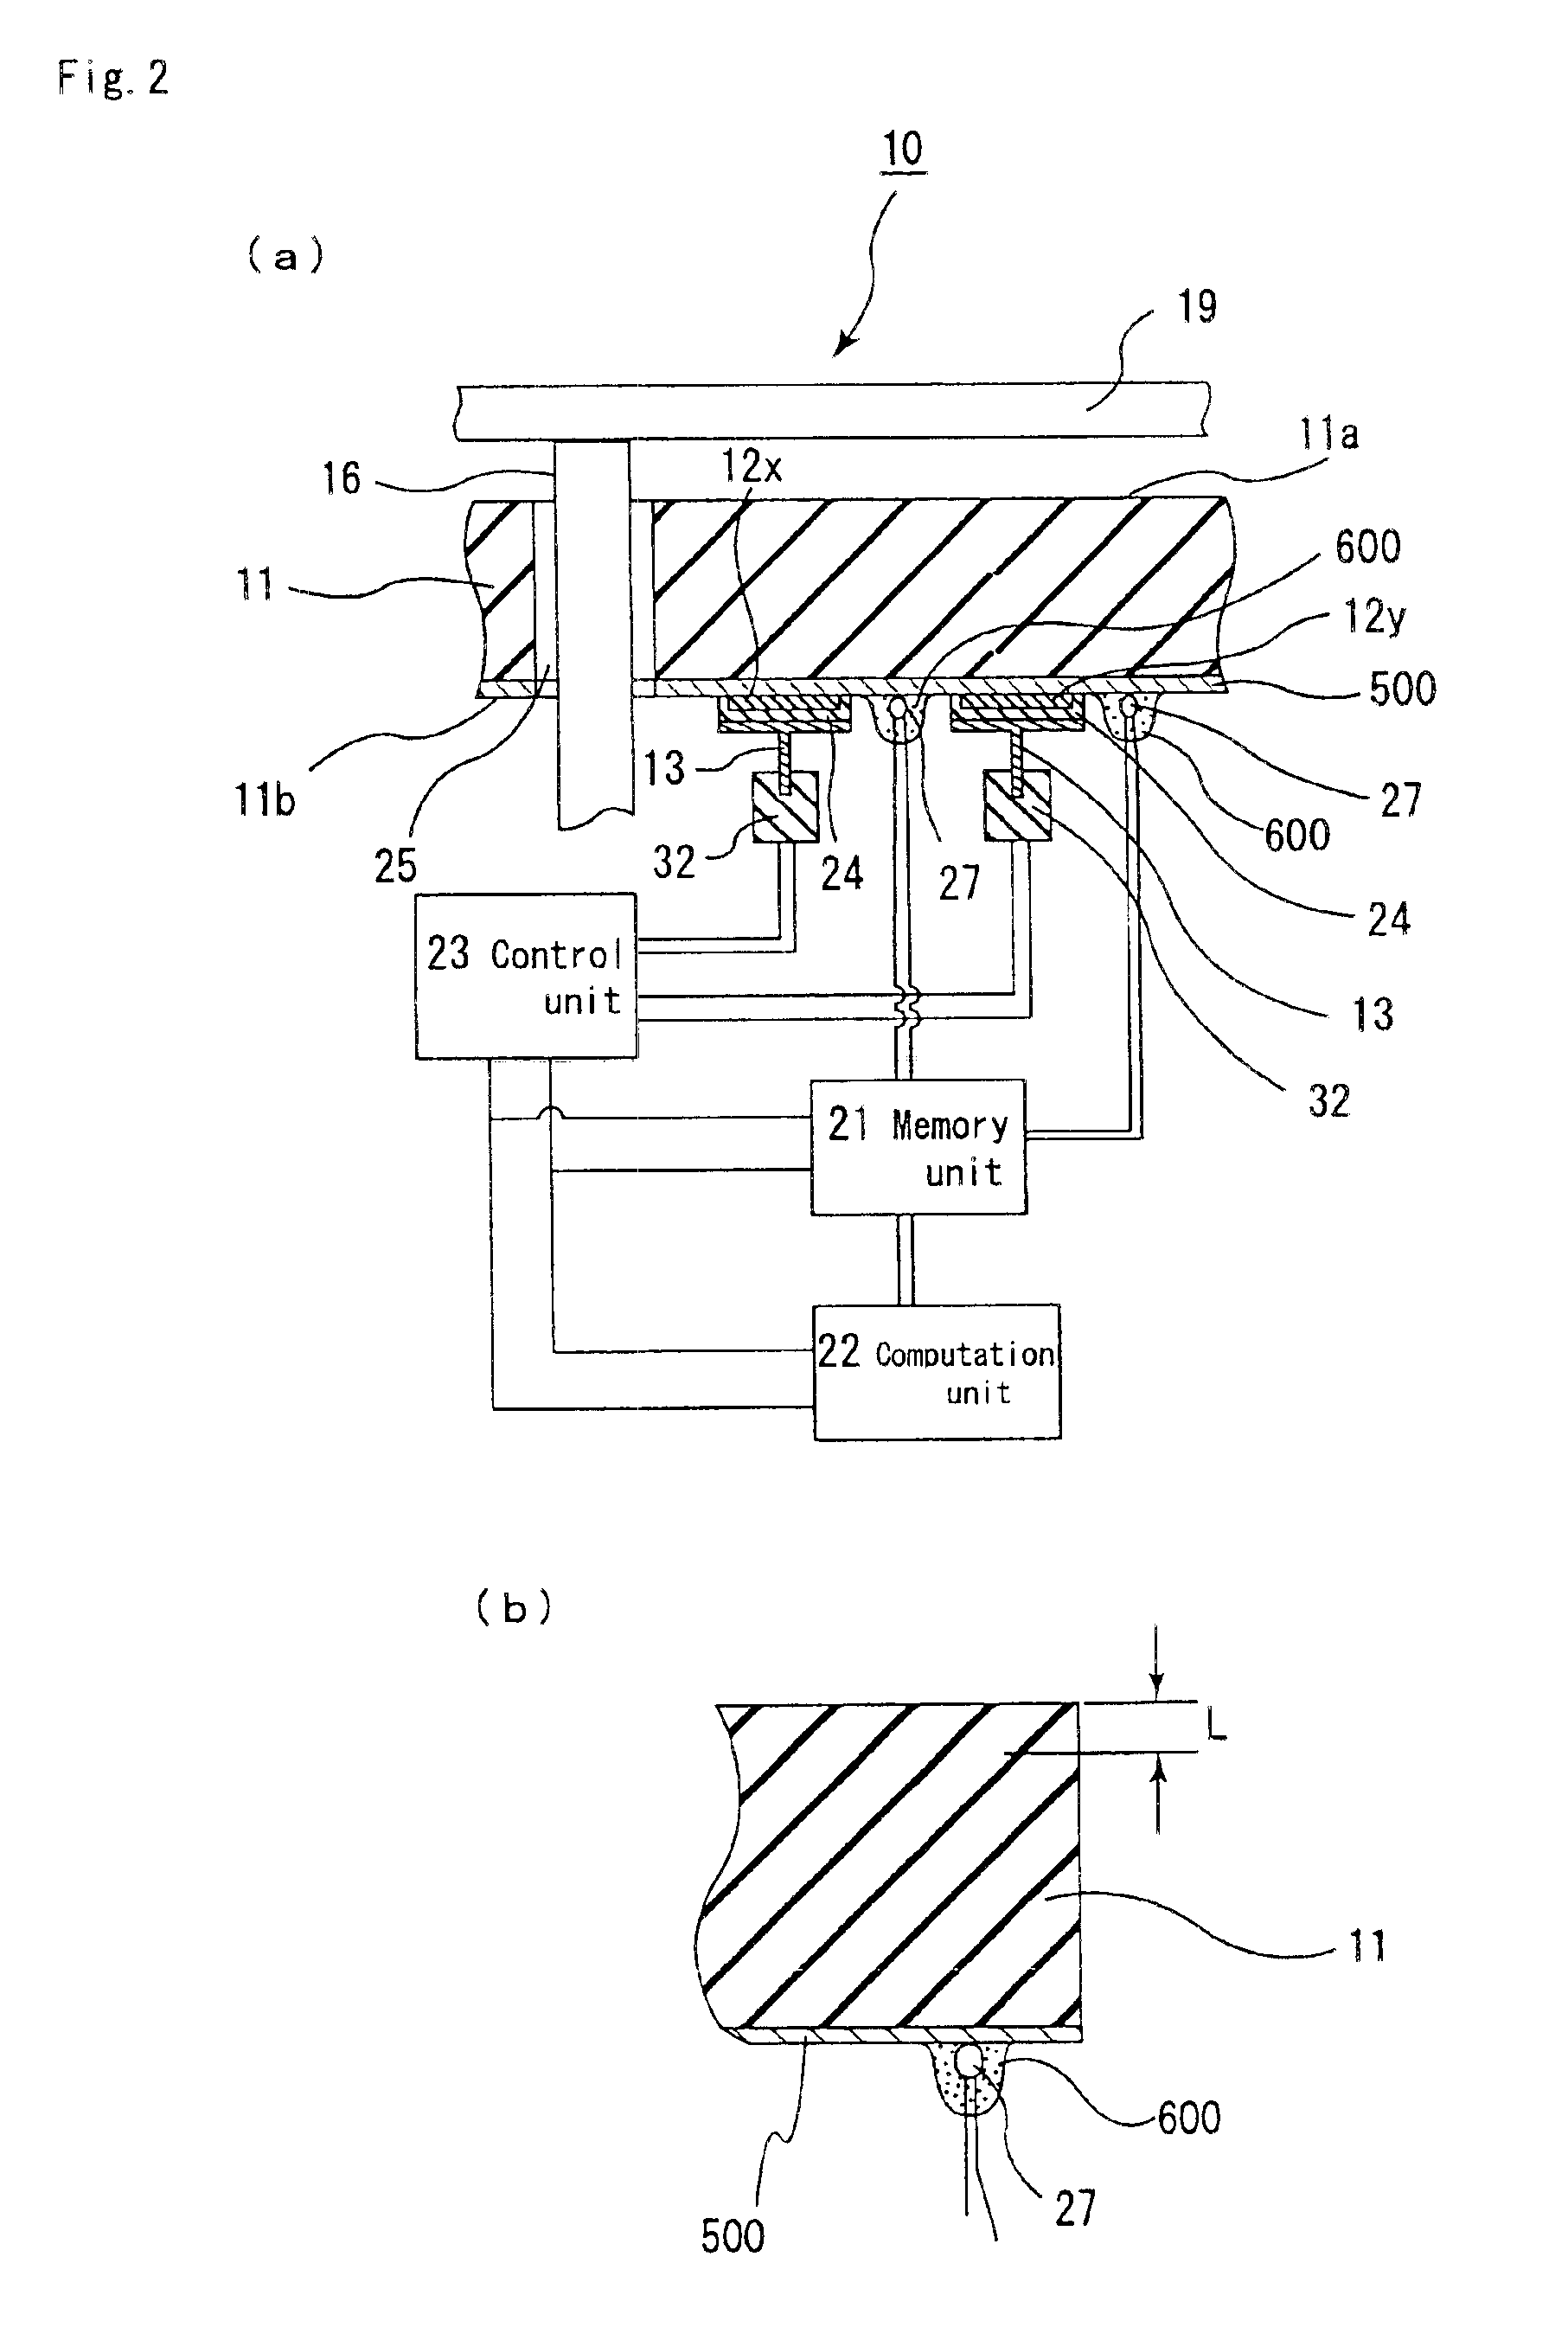 Ceramic heater for semiconductor manufacturing and inspecting equipment